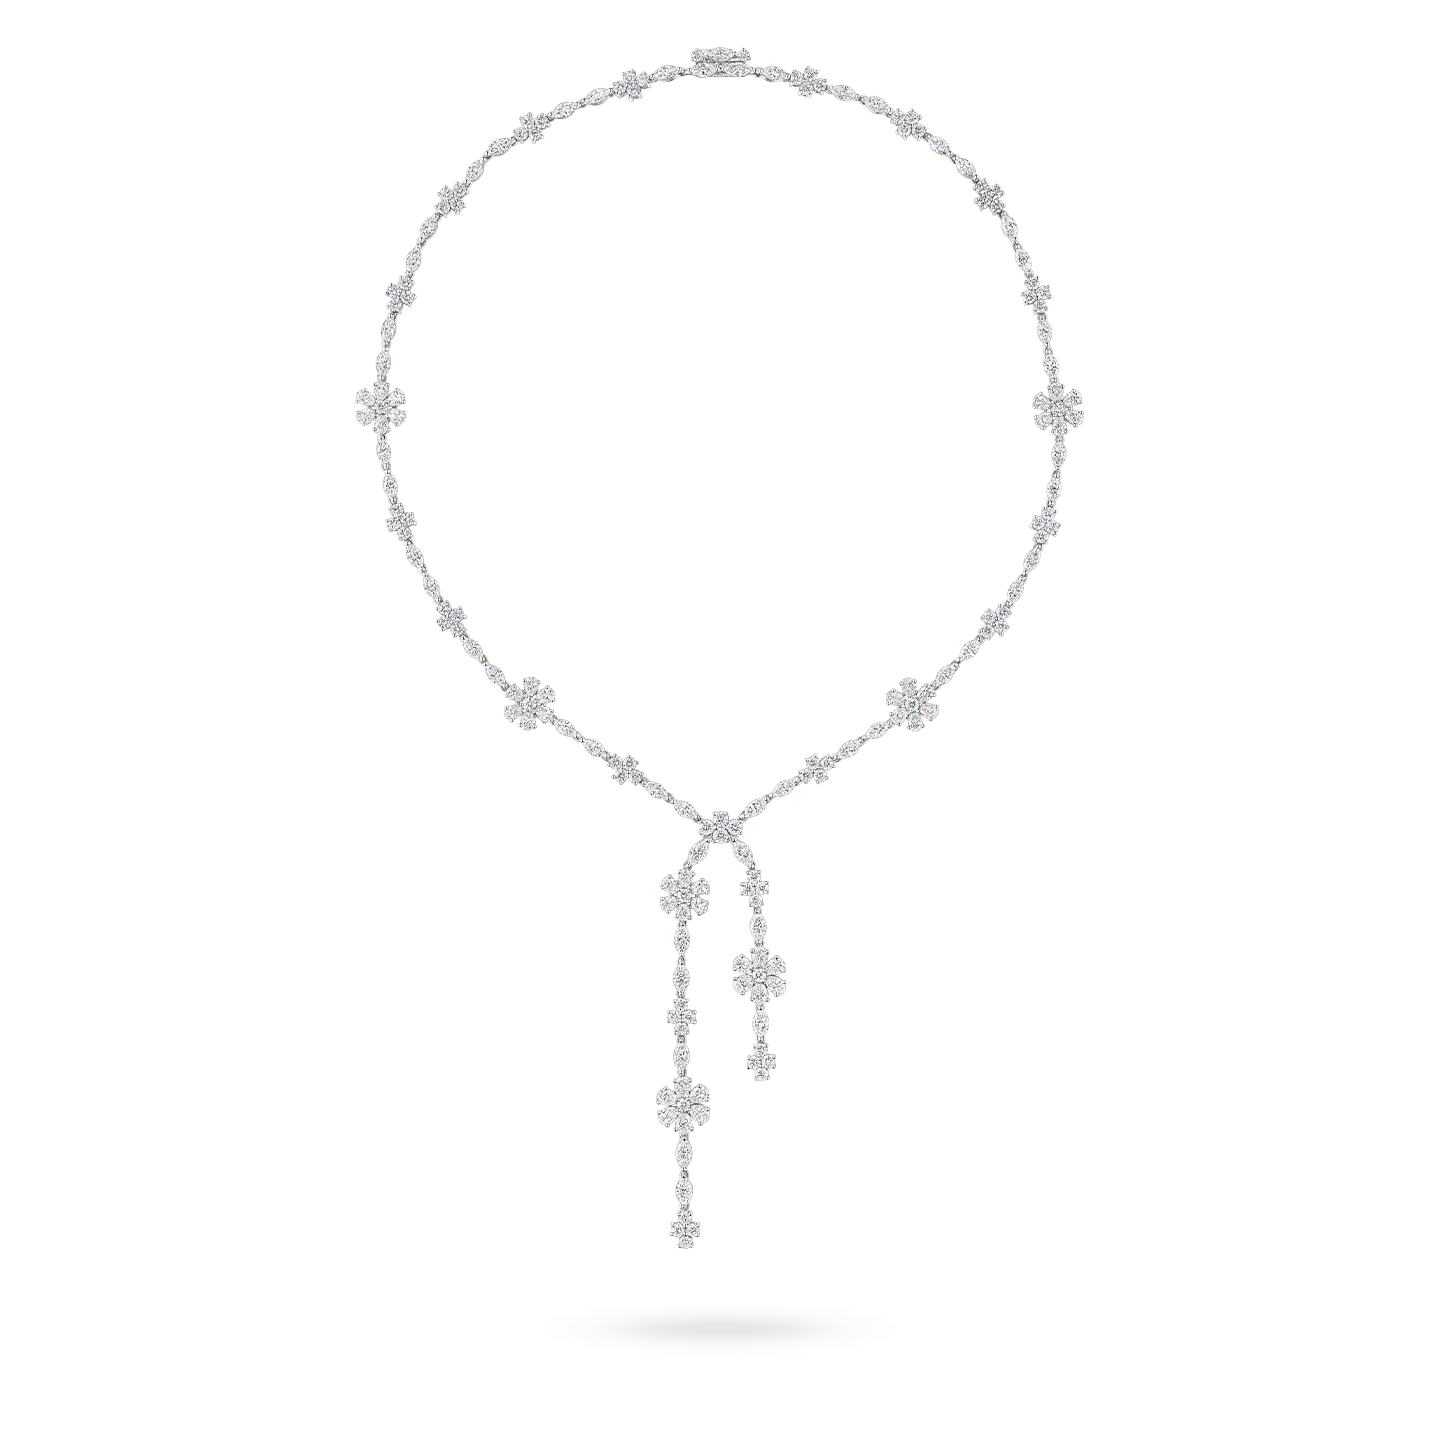 Forget-Me-Not Lariat Diamond Necklace, Product Image 1